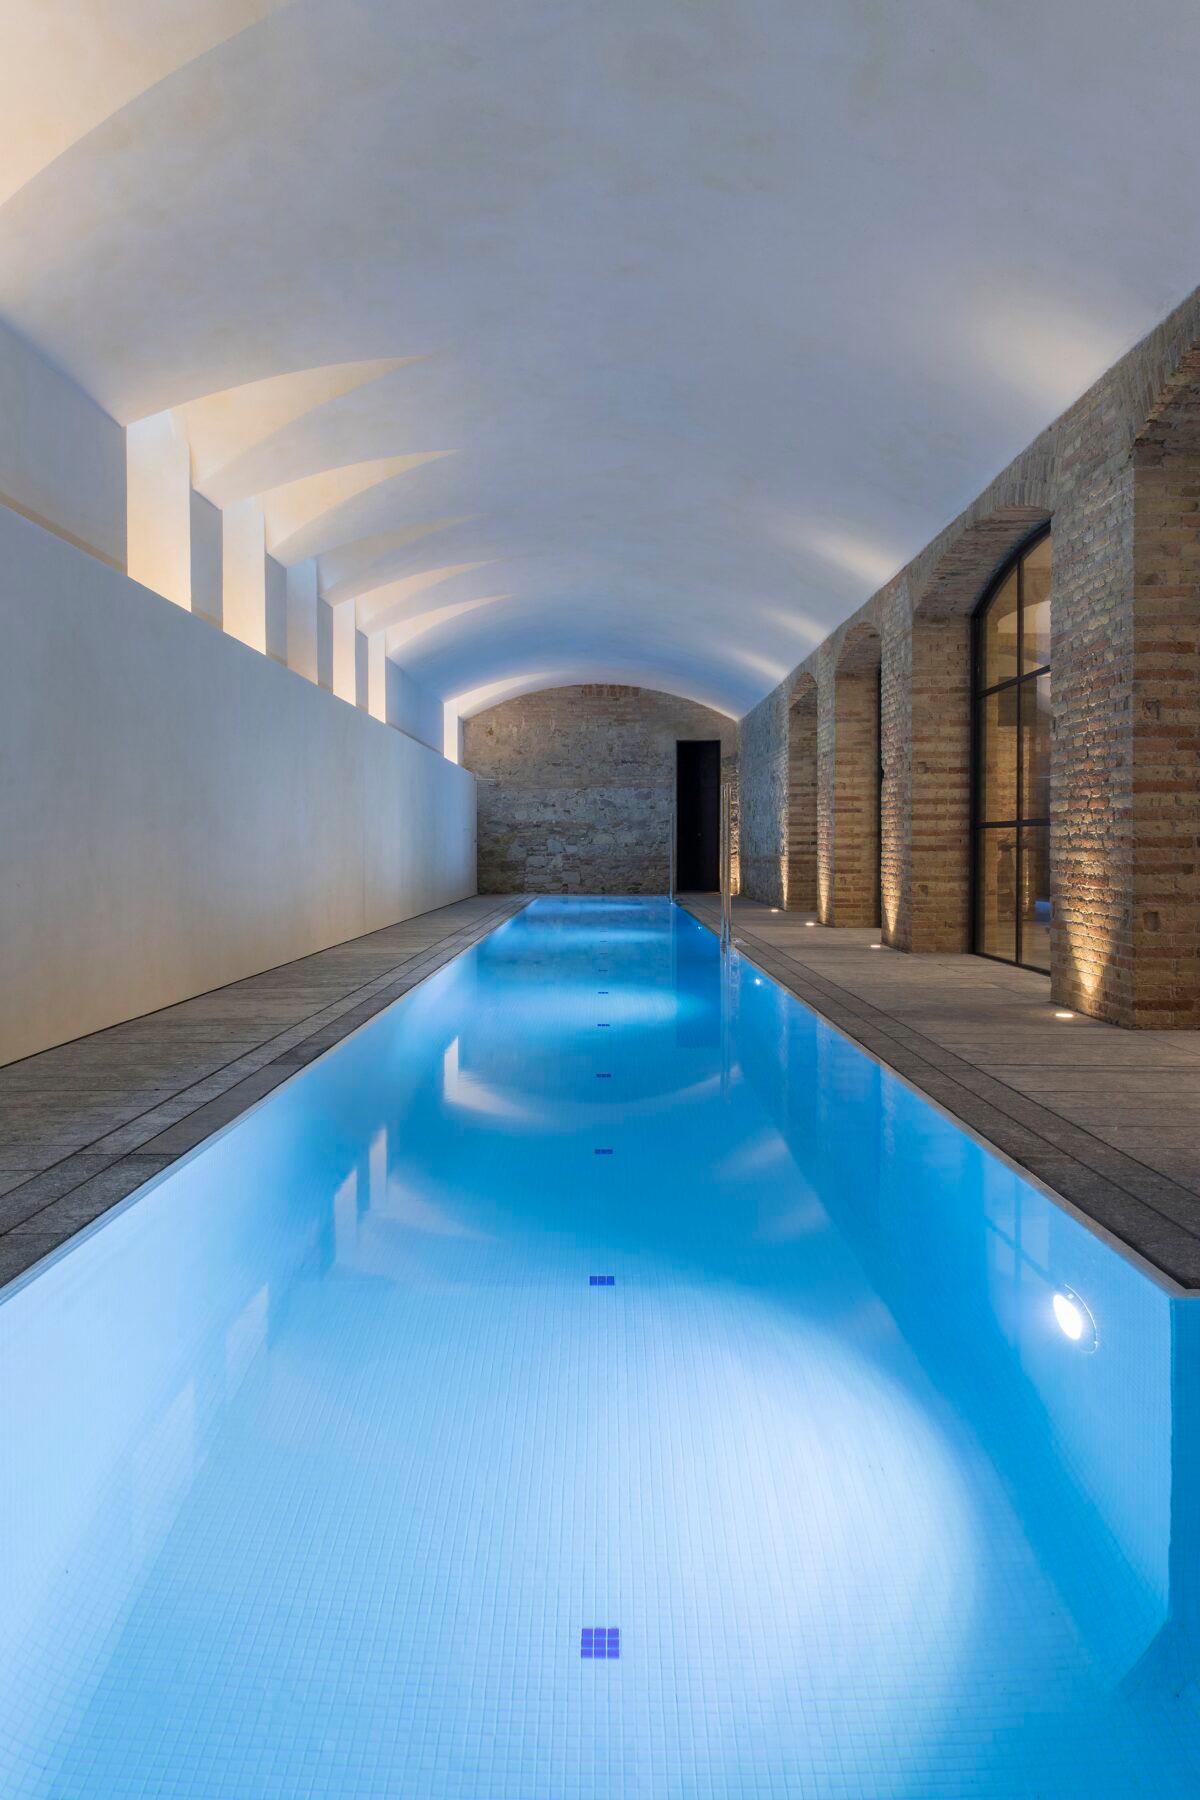 The heated indoor pool. (Jordi Folch and Jose Hevia)